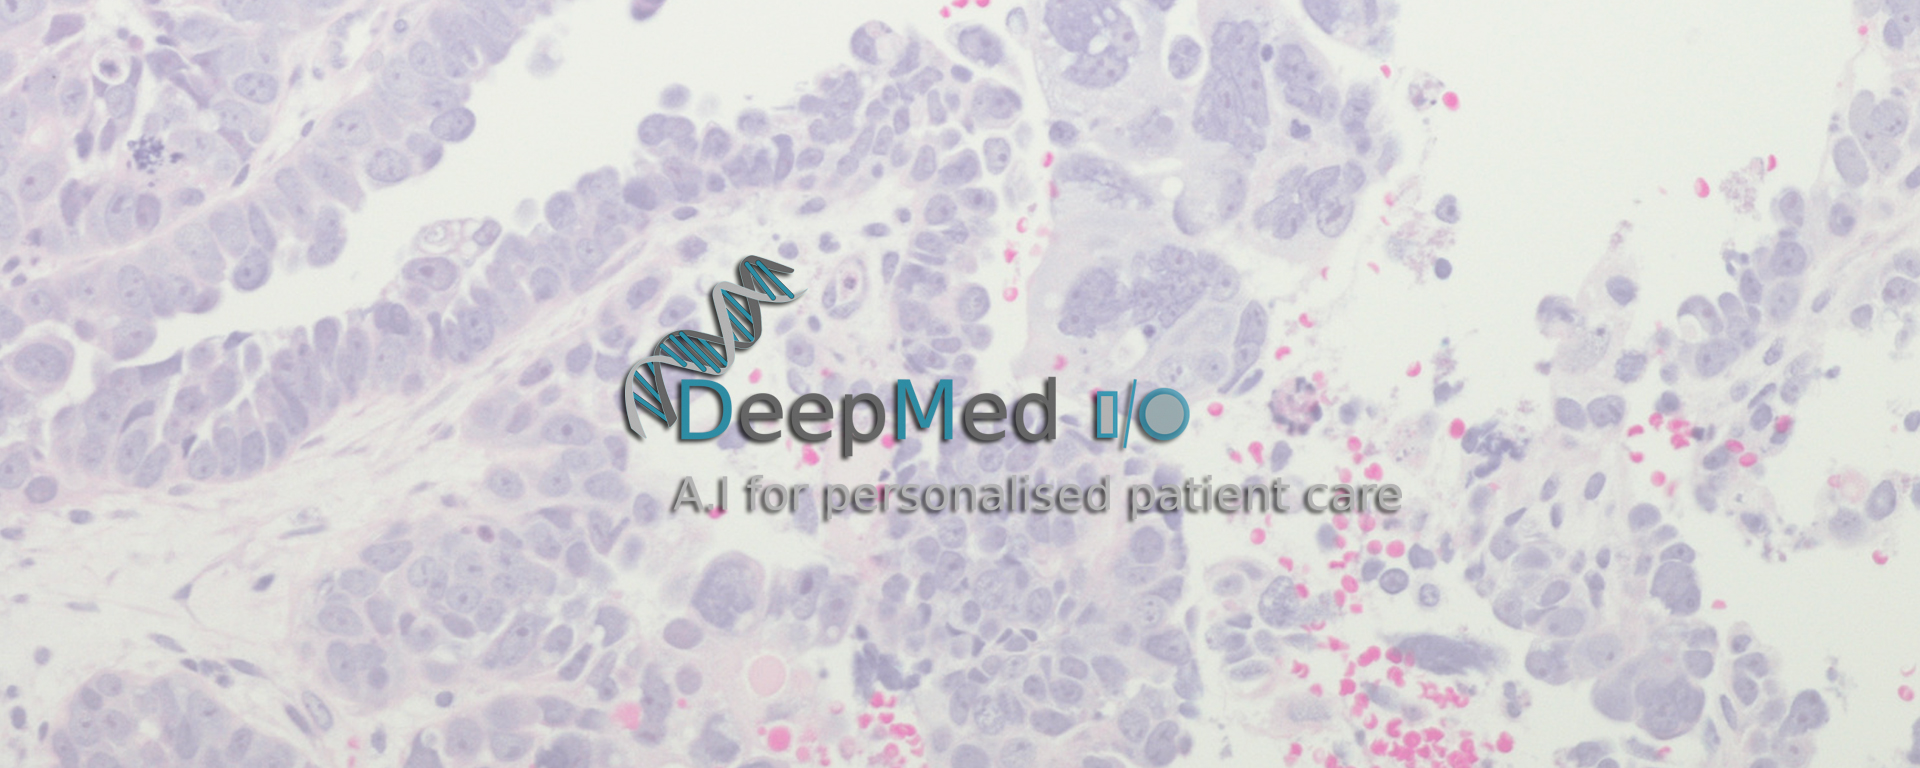 DeepMedIO -A.I for personalised patient care